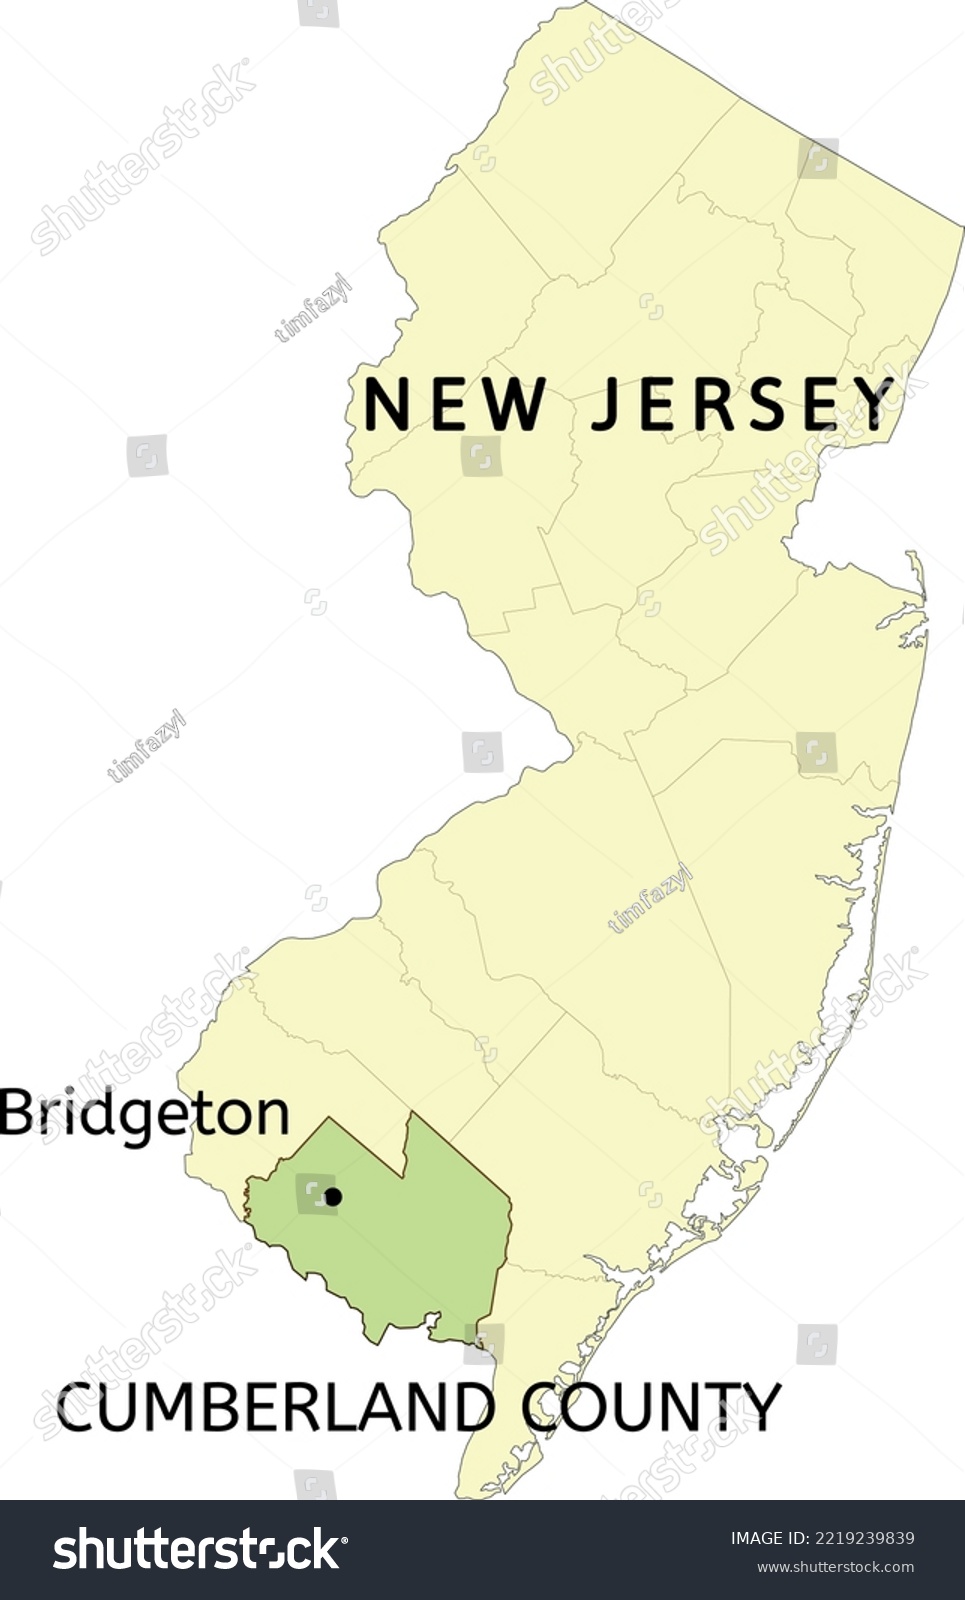 SVG of Cumberland County and city of Bridgeton Landing location on New Jersey state map svg